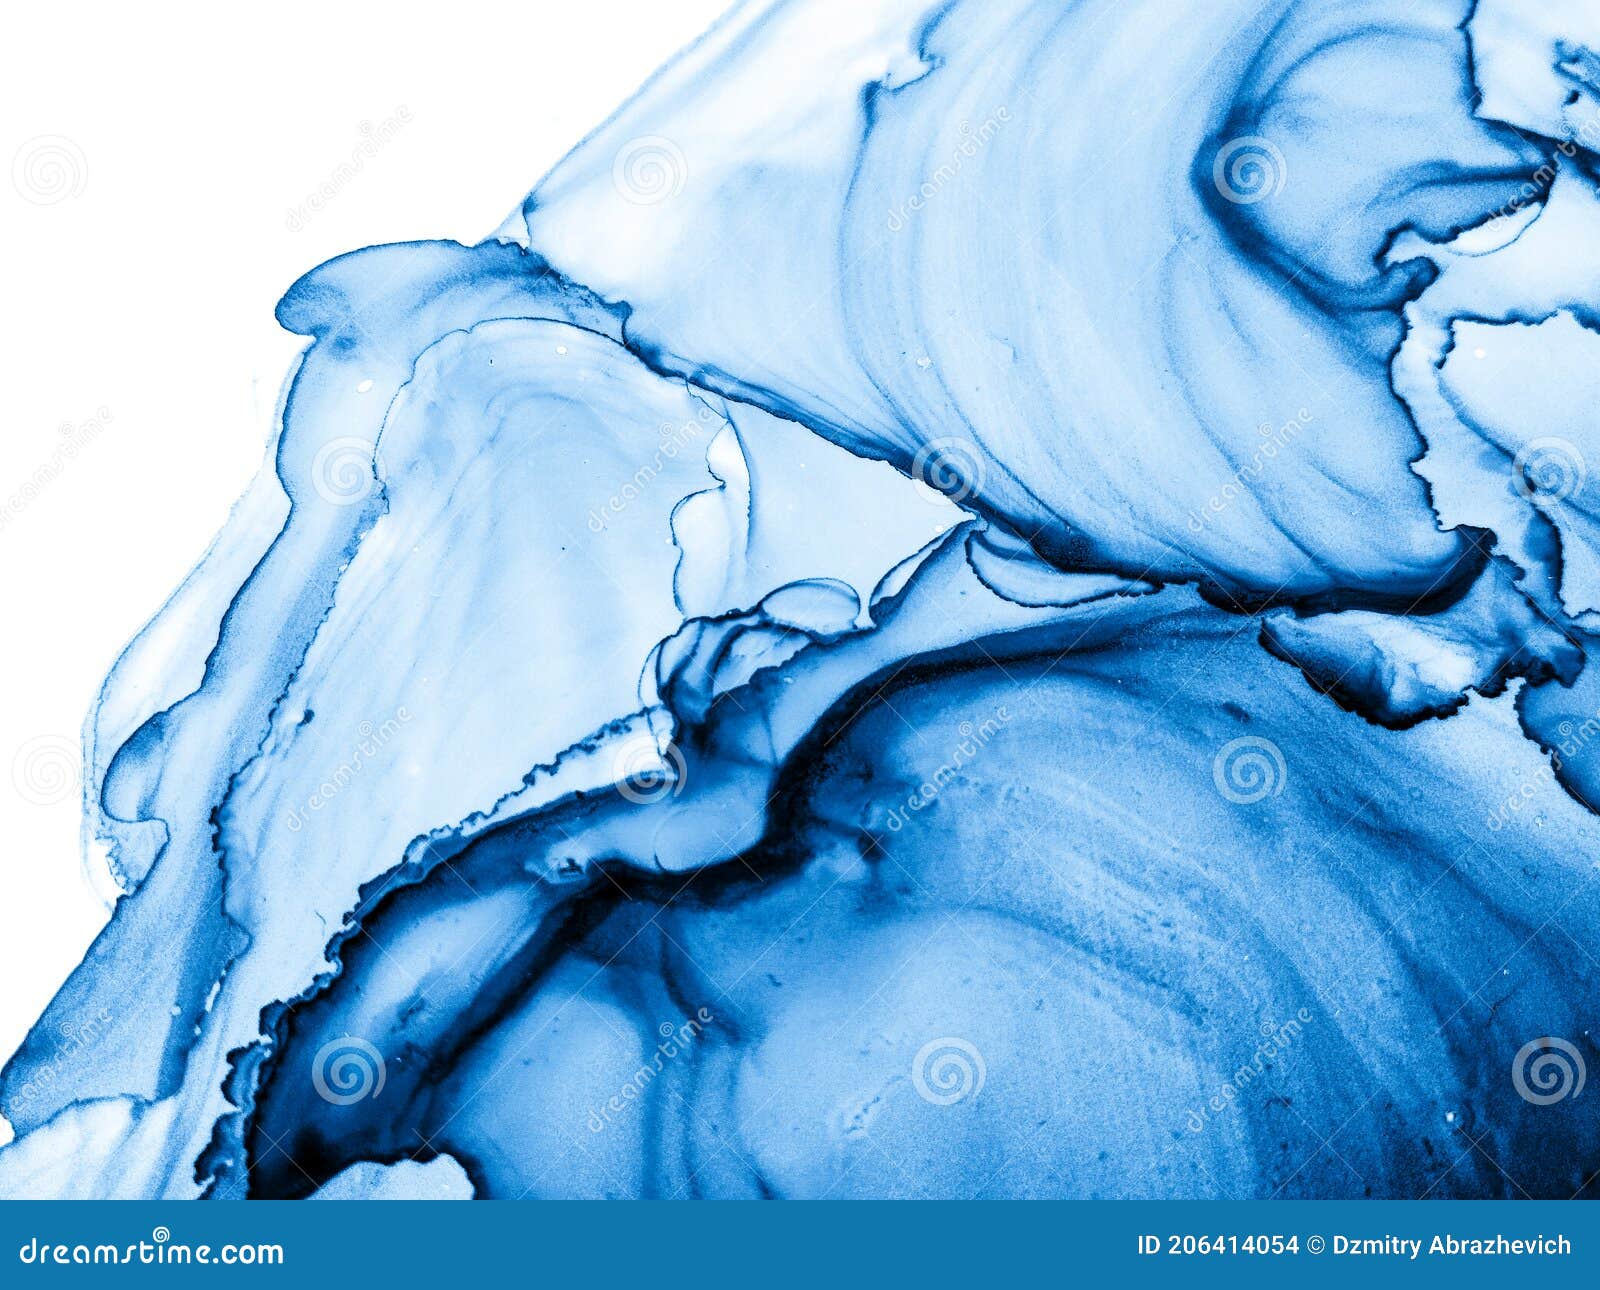 Blue Alcohol Art. Trendy Realistic Dirty Painting. Marble Texture ...